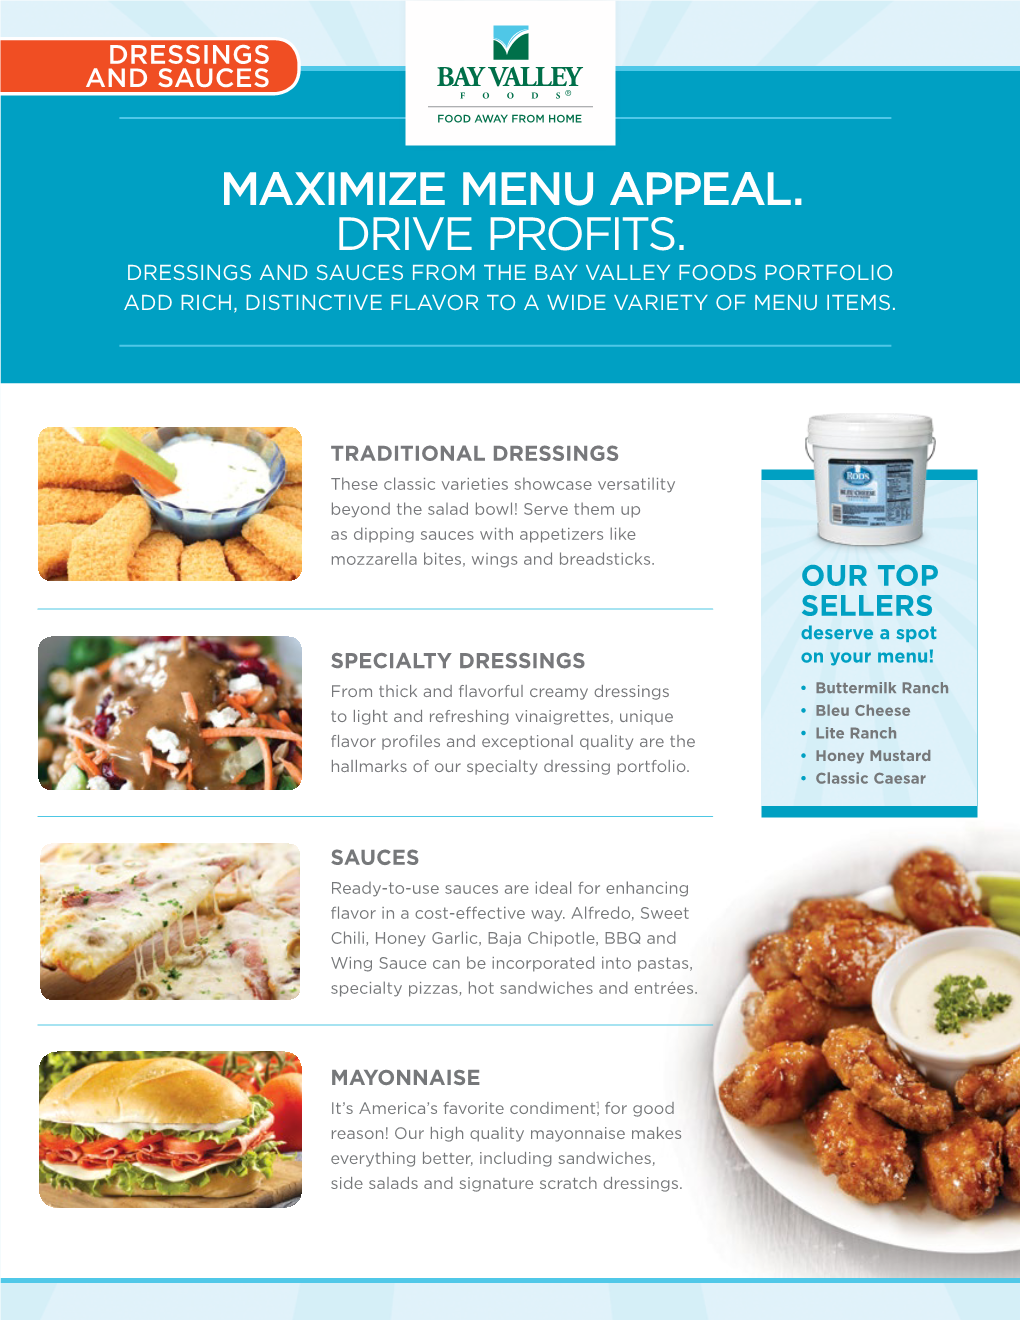 Maximize Menu Appeal. Drive Profits. Dressings and Sauces from the Bay Valley Foods Portfolio